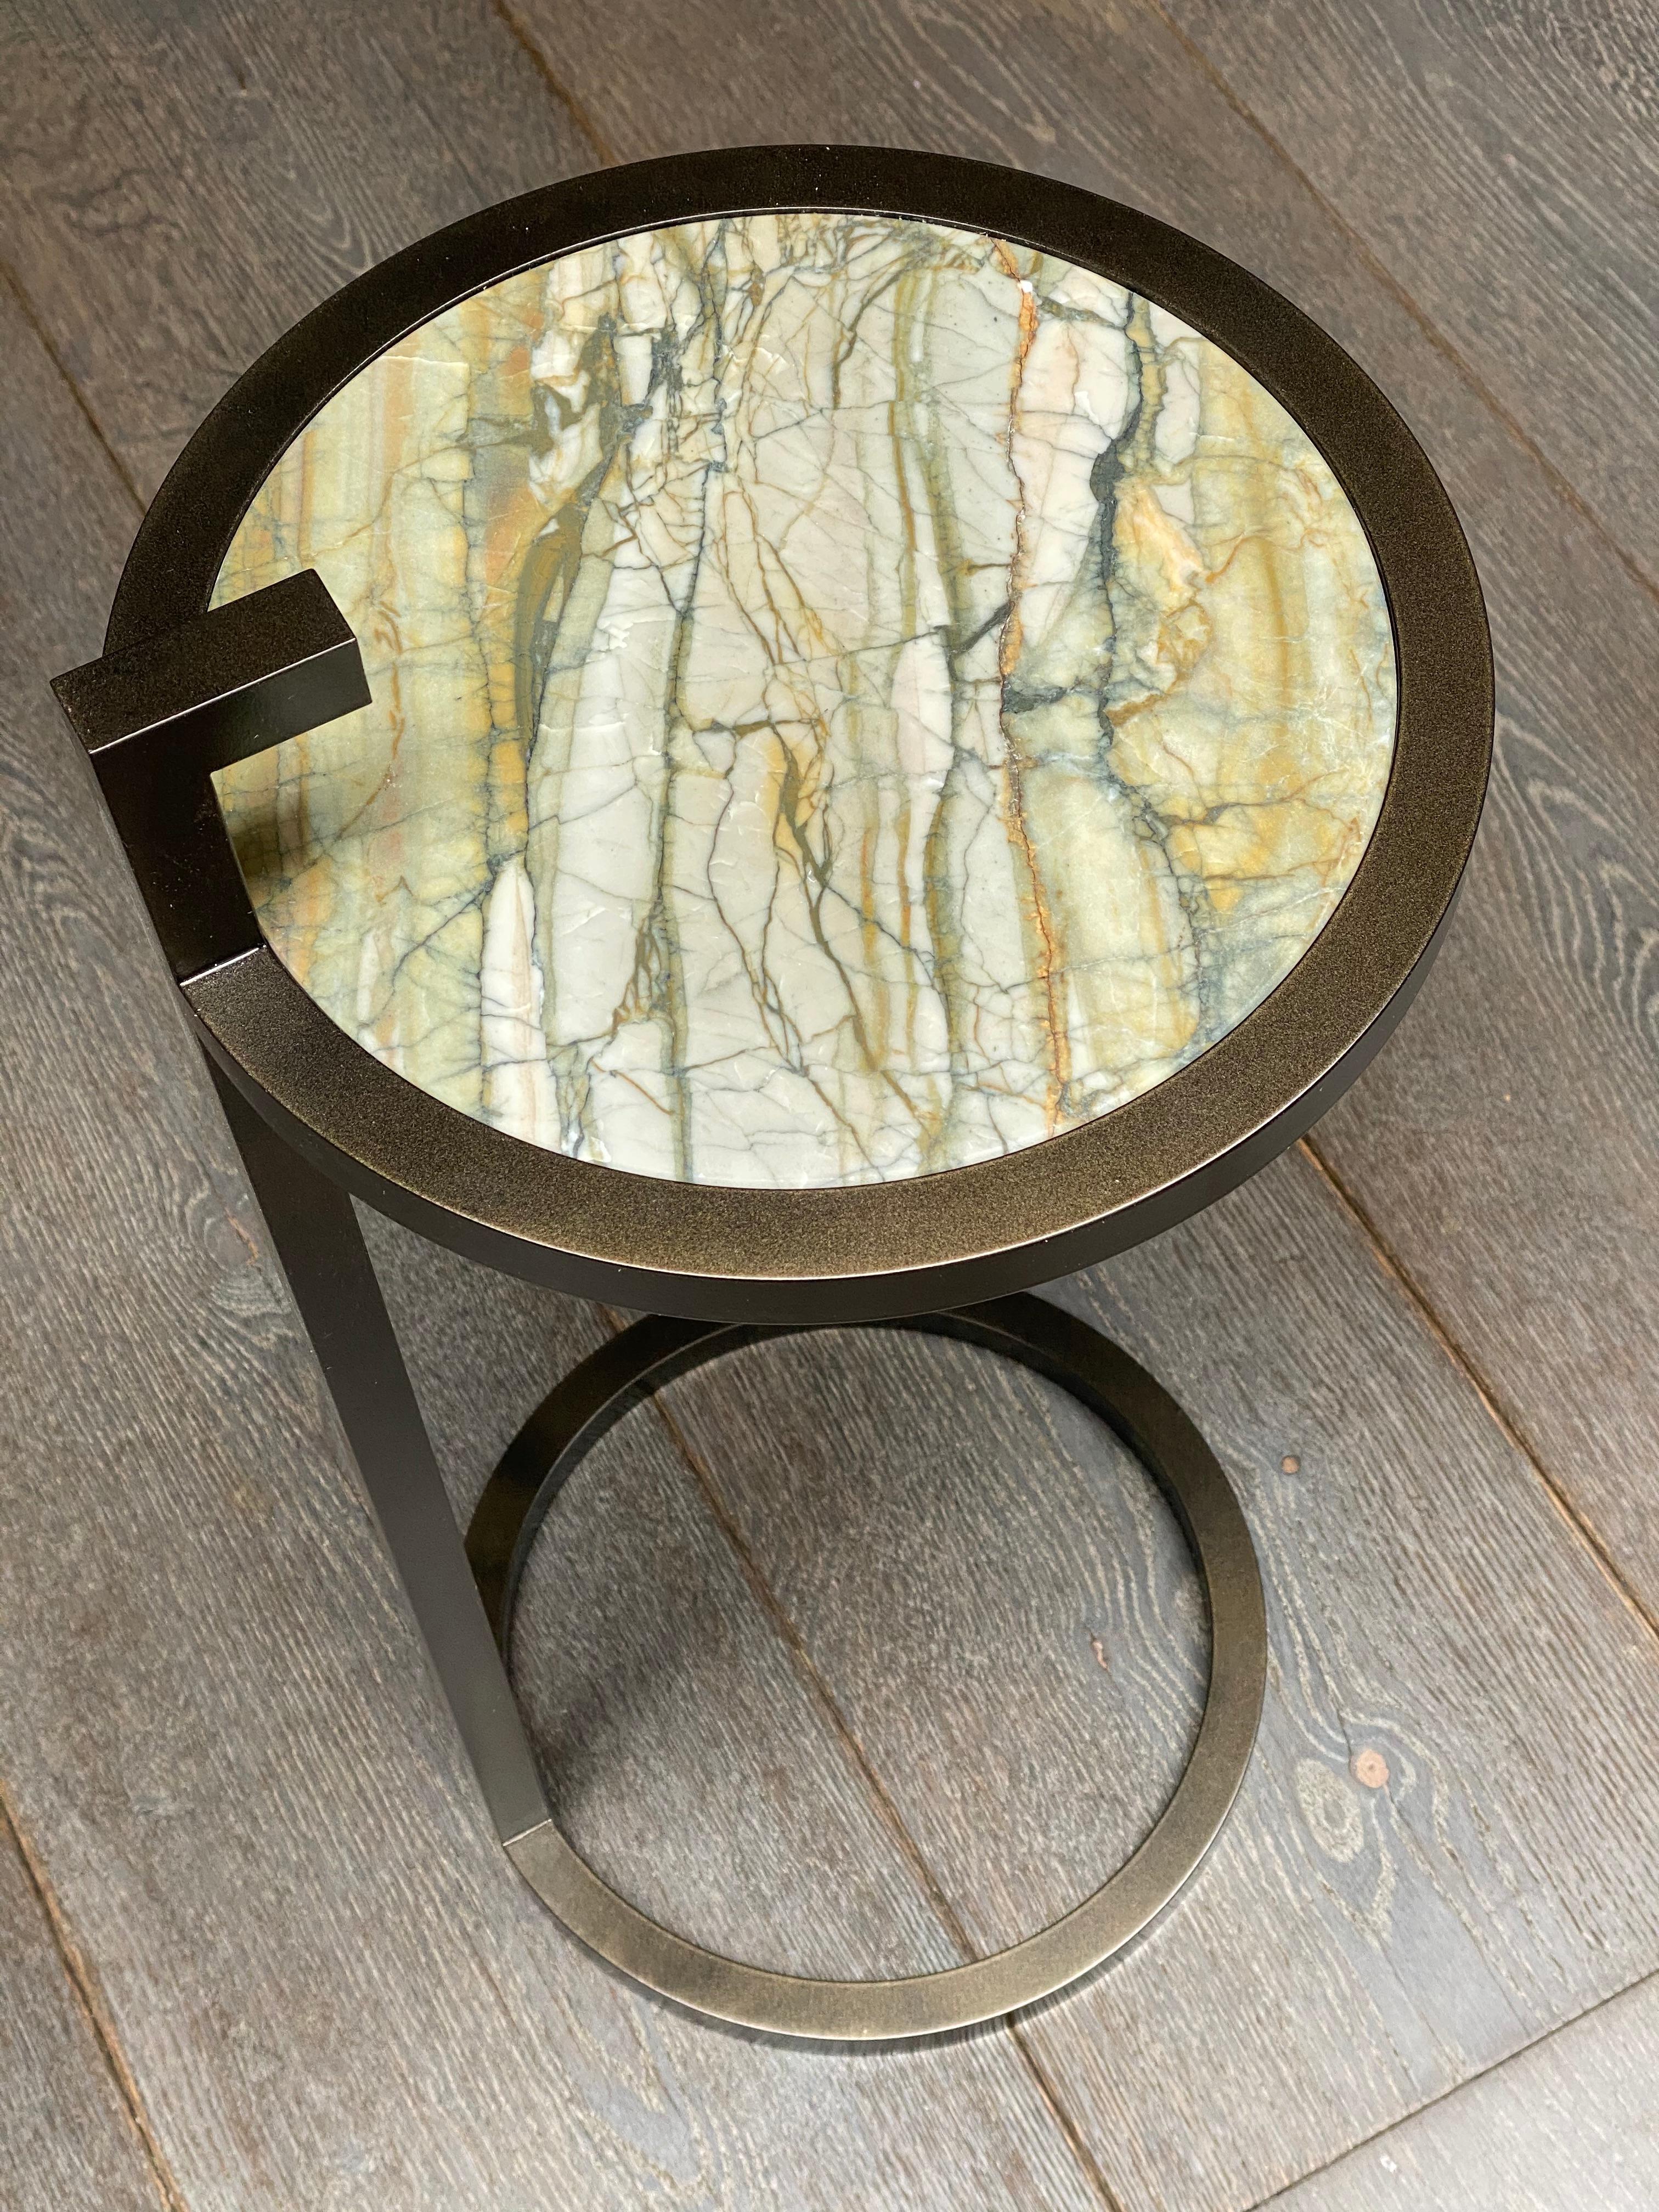 The Kangaroo Table with its marble surfaces captures the classic essence of the well-known 